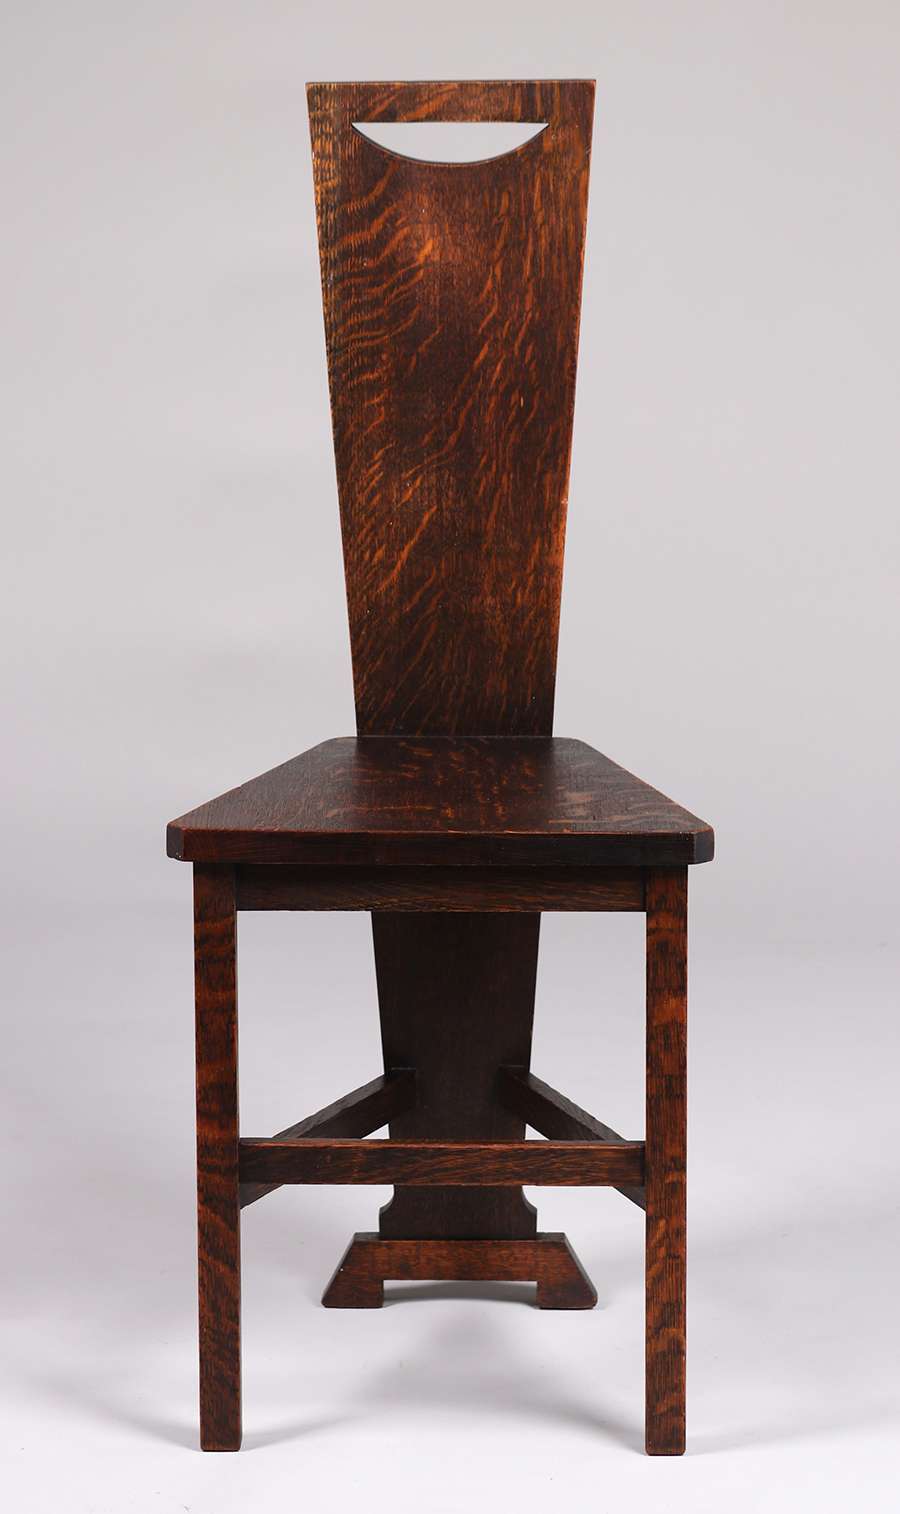 California Historical Design | Barber Brothers #257 Hall Chair c1908